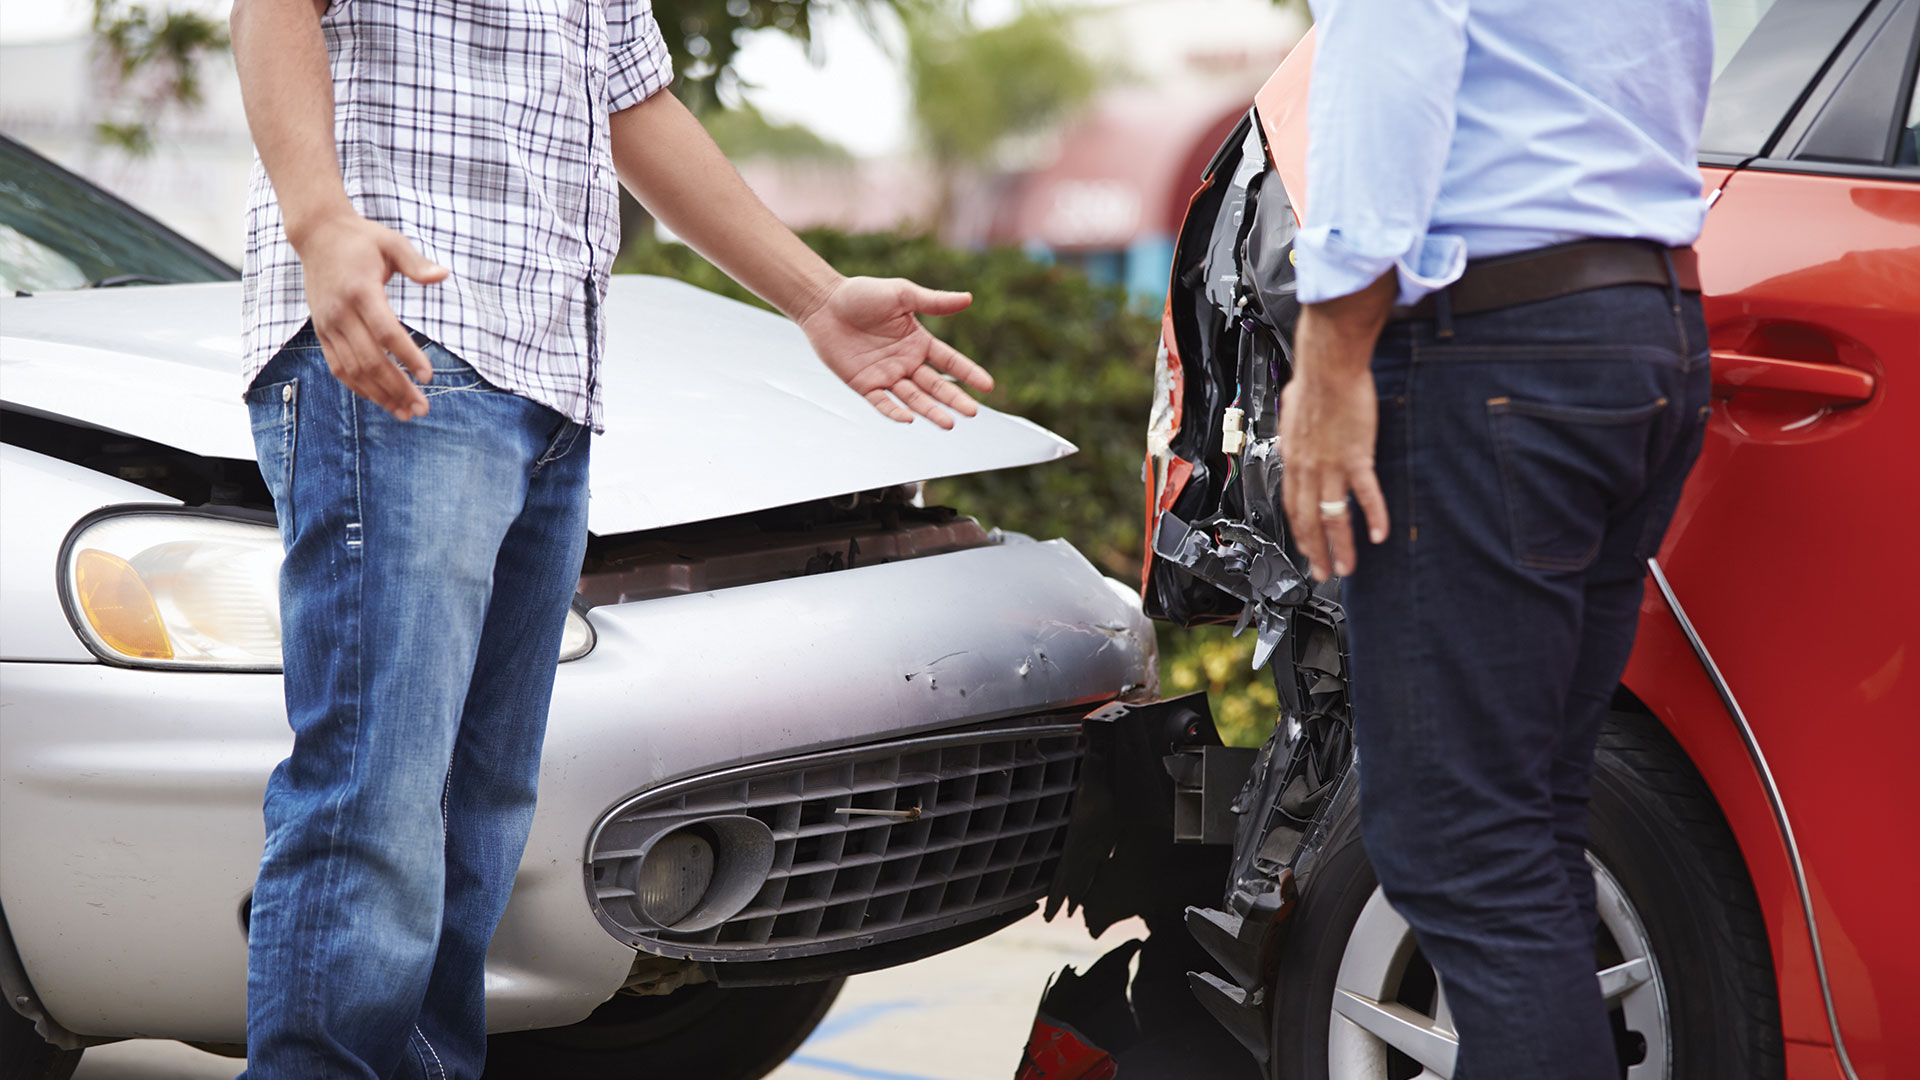 Auto Accident Injury Treatment at Center For Auto Accident Injury Treatment in San Diego